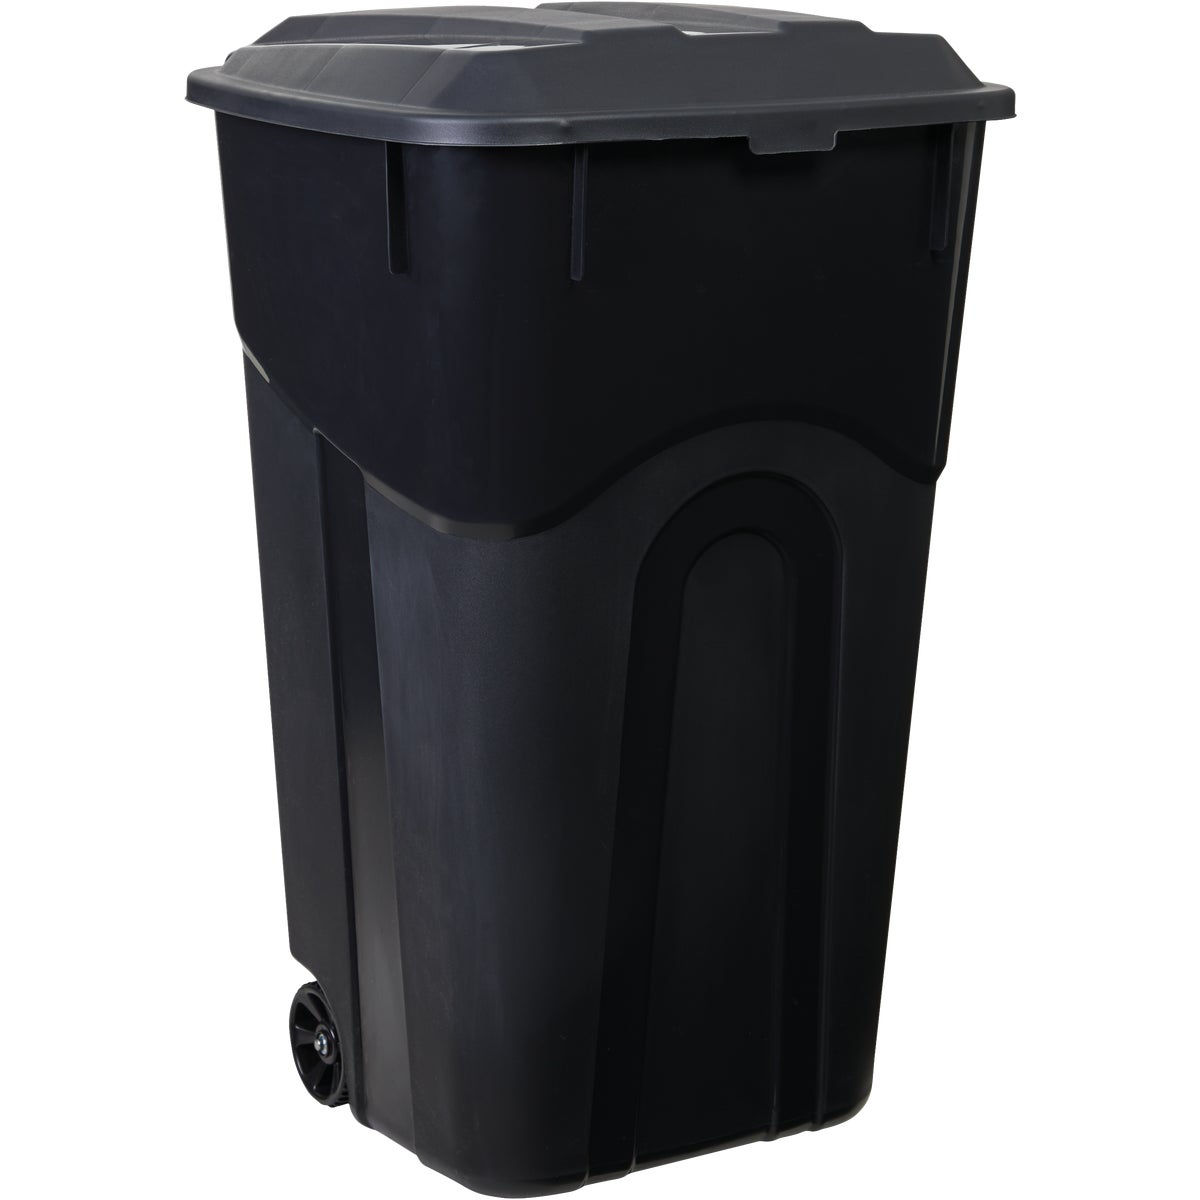 United Solutions Rough and Rugged 32 Gal. Wheeled Trash Can with